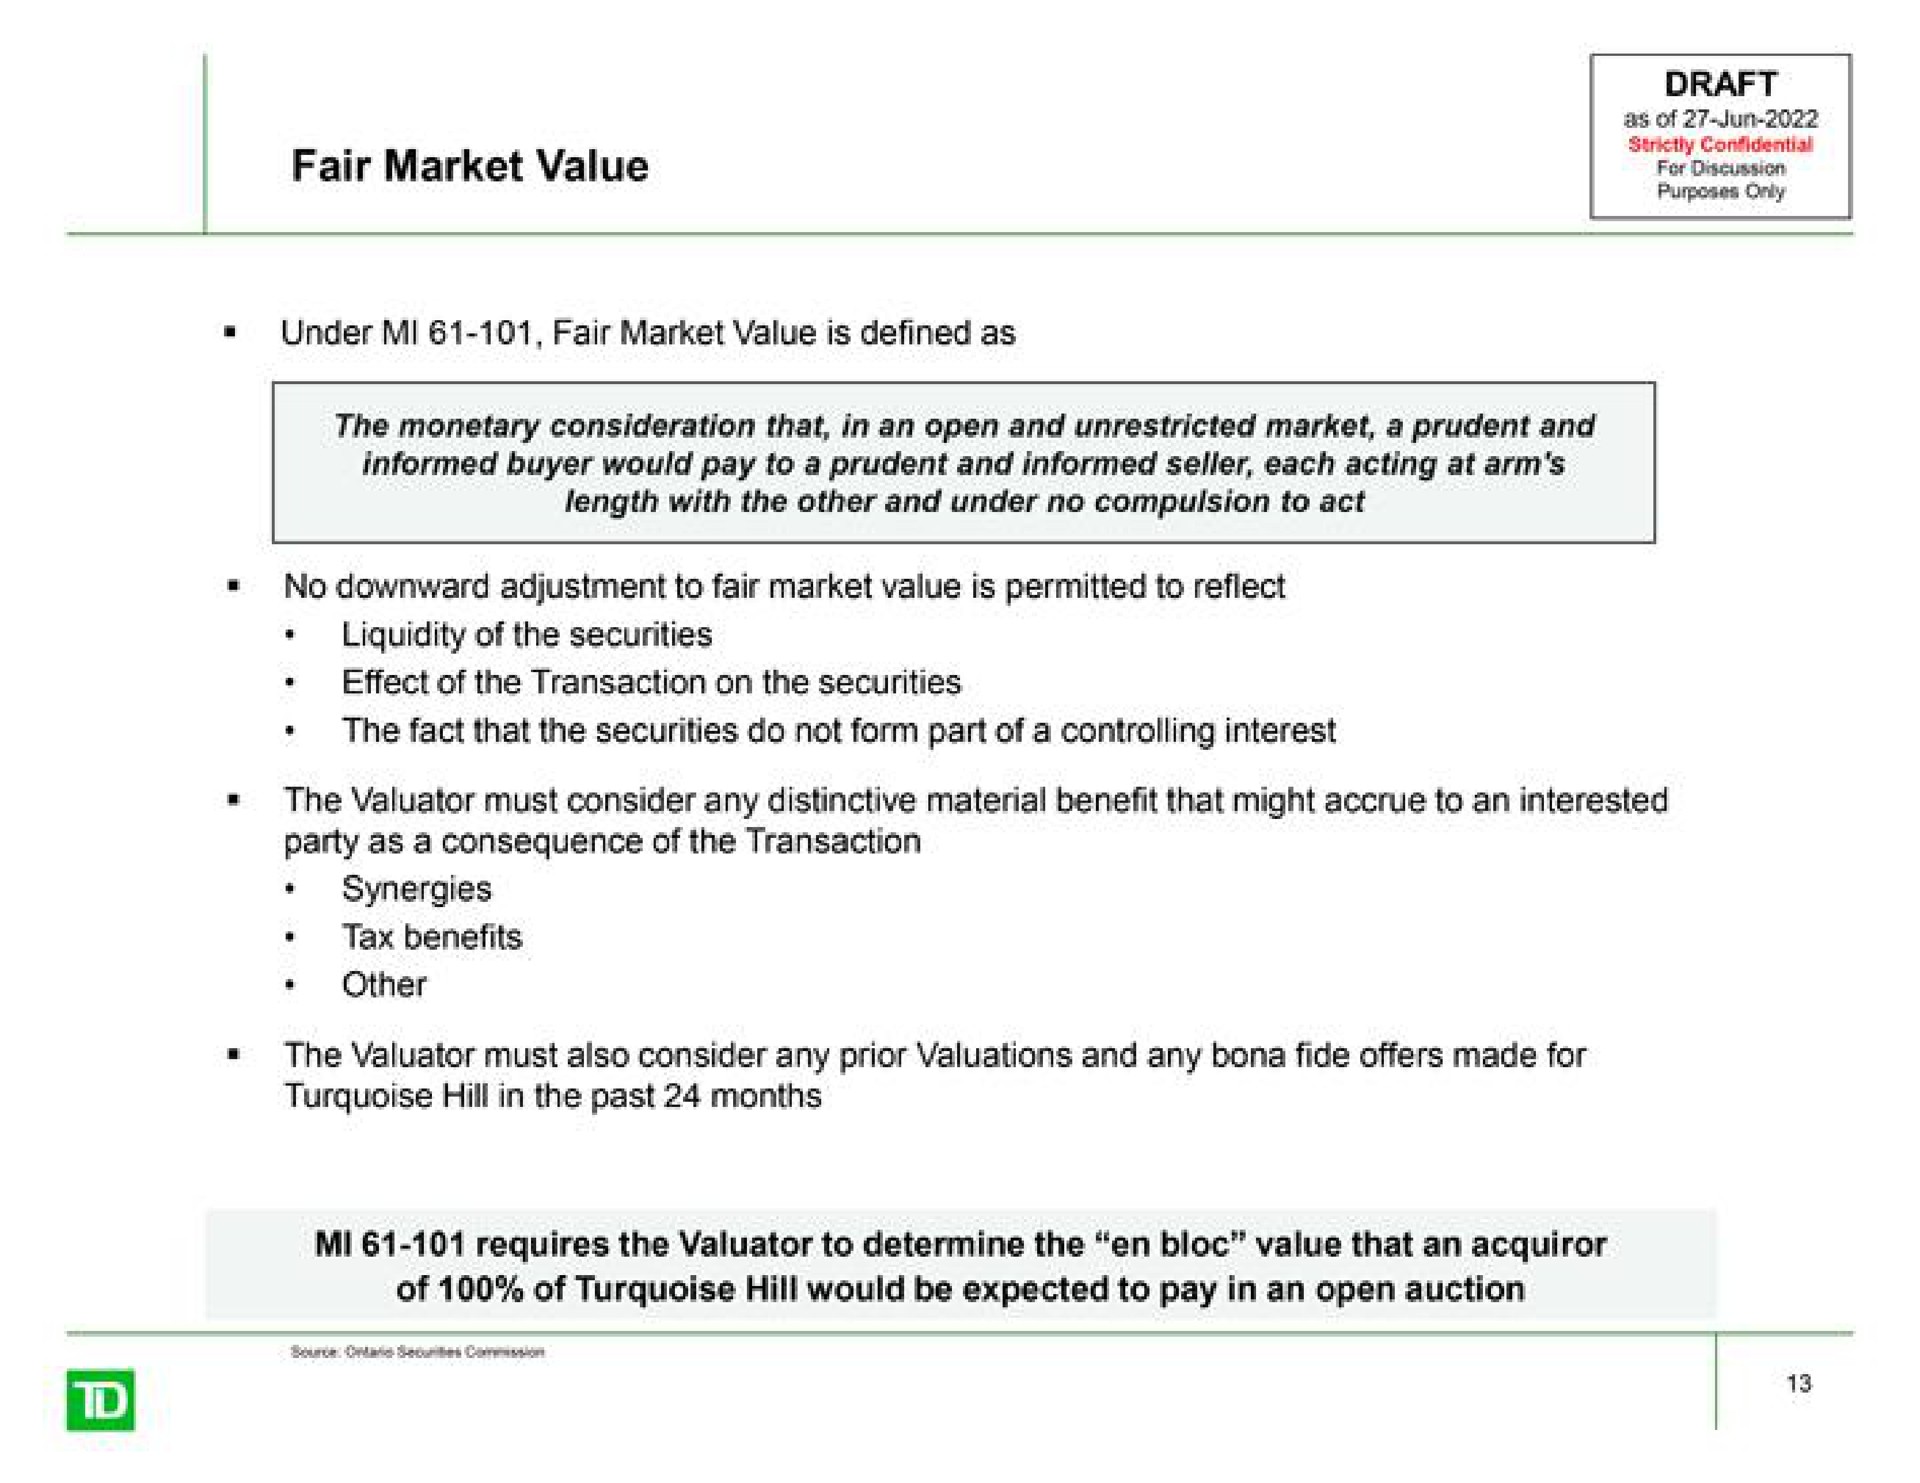 fair market value for discussion liquidity of the securities the fact that the securities do not form part of a controlling interest tax benefits the valuator must also consider any prior valuations and any fide offers made for | TD Securities